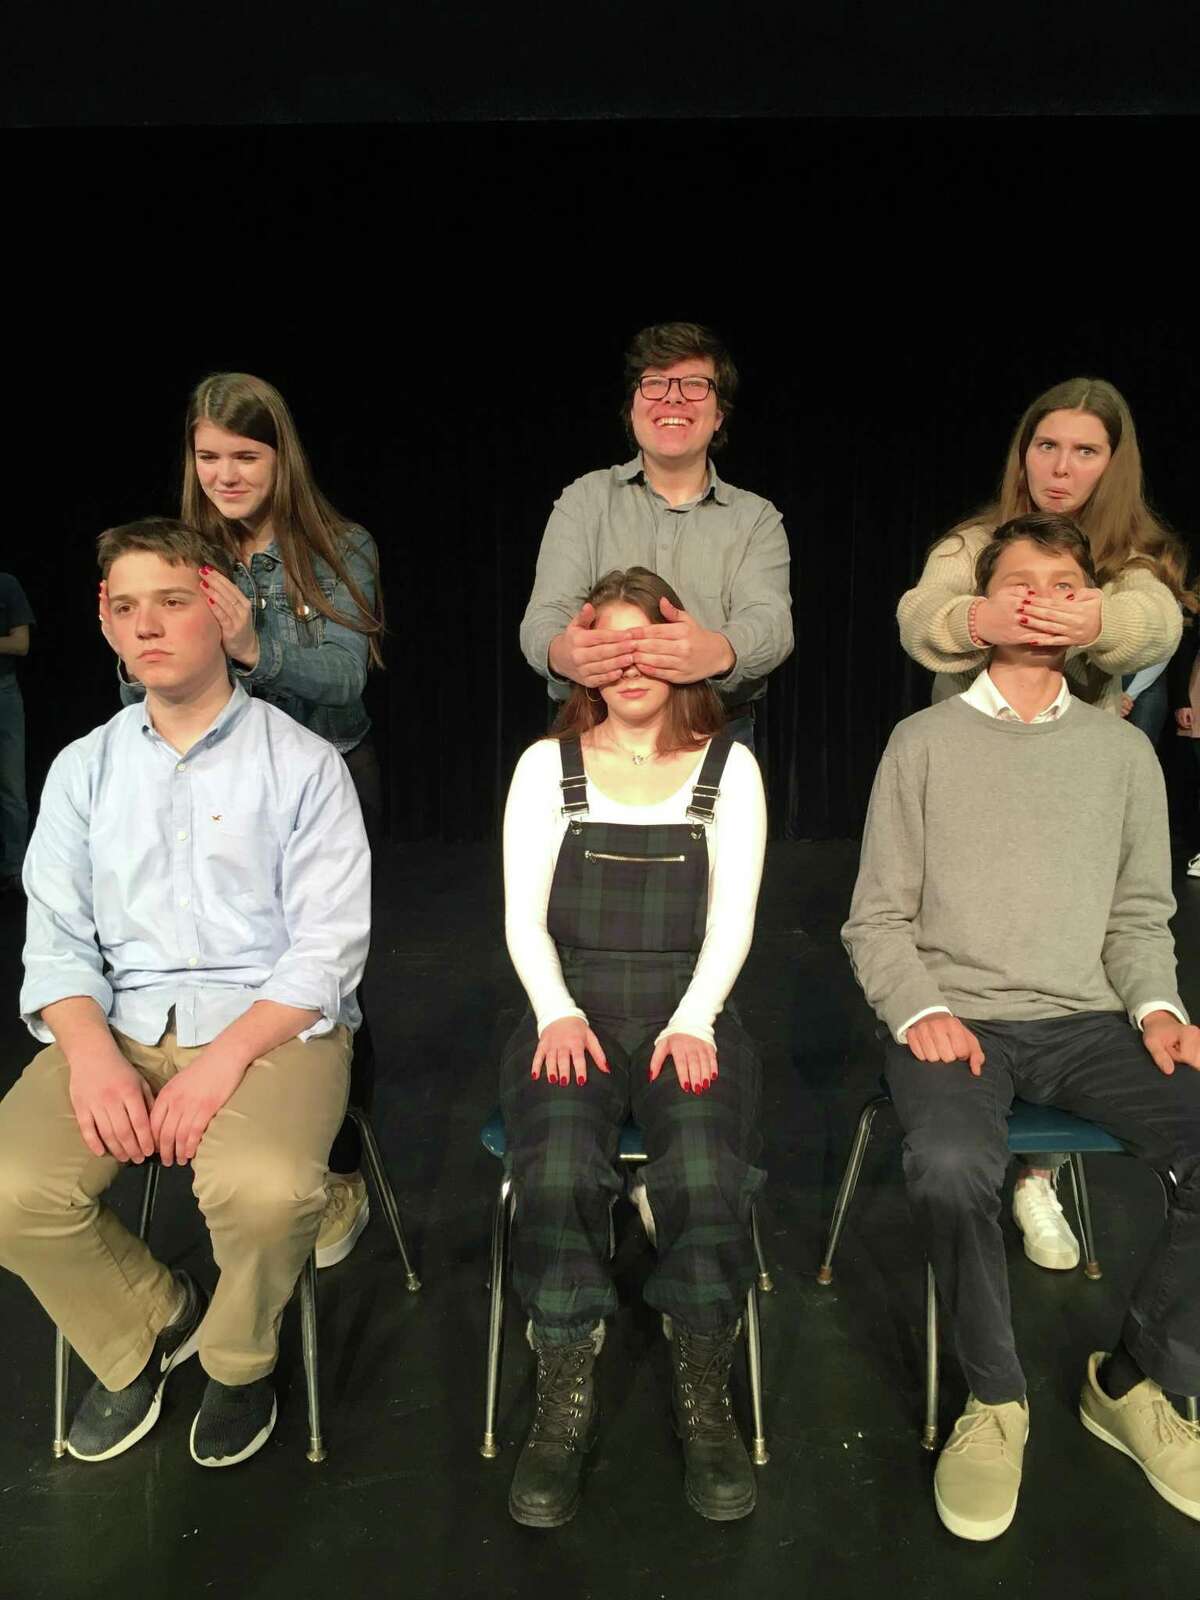 Sarah Bates, Mickey Wilcox, Devin Moran, Liv Becraft, Mairead Kehoe, Anton Rushevich rehearse for Freeplay, presented Jan. 17-18, 2020, in Wilton High School's Little Theater.